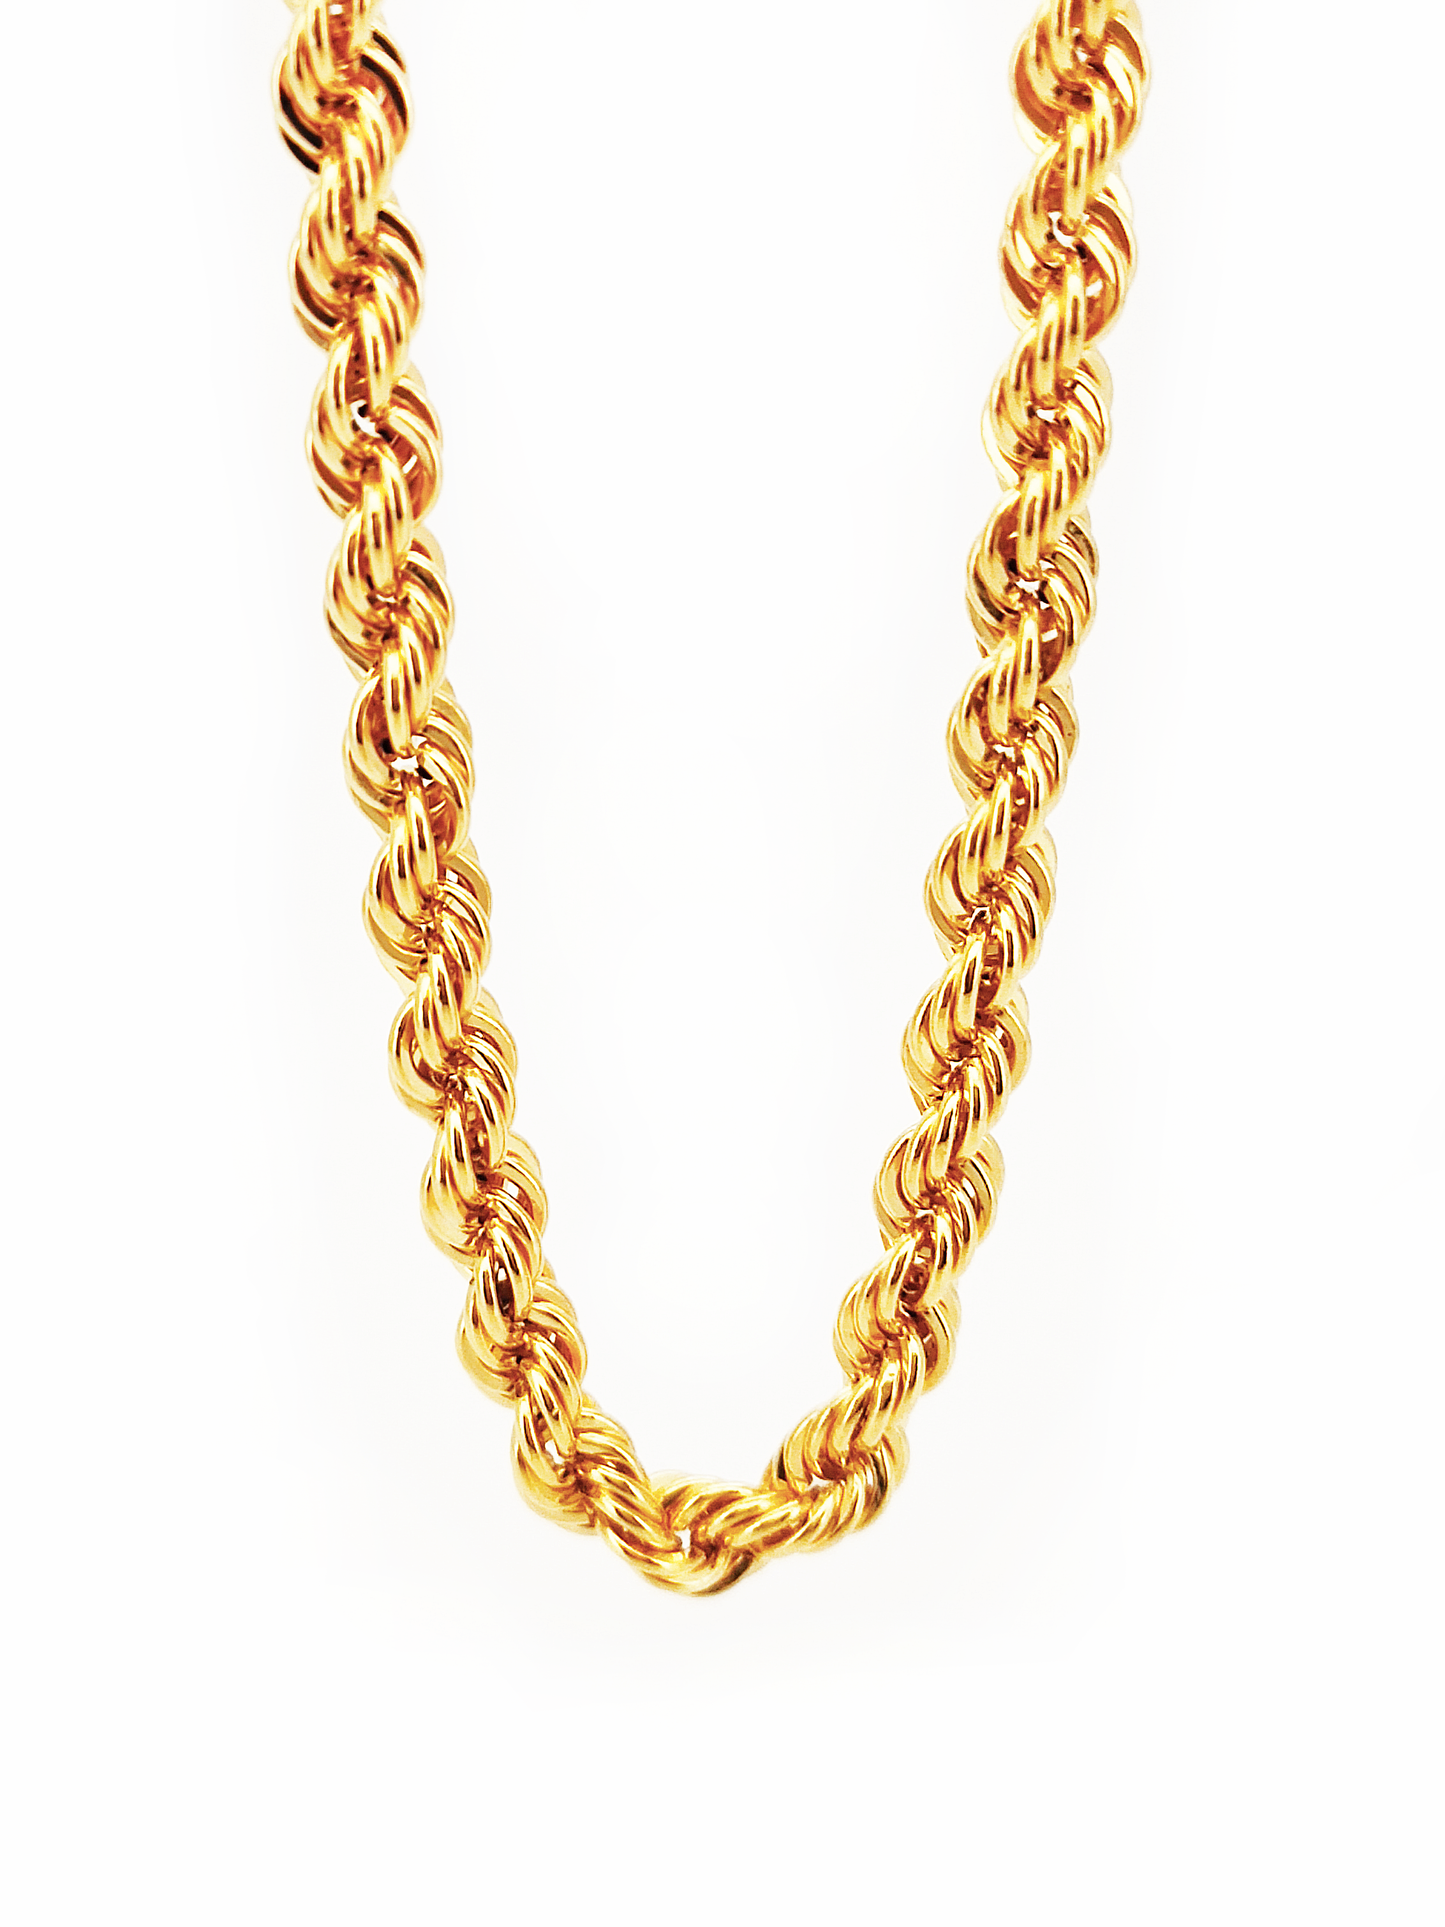 916 Hollow Rope Chain (6mm series & above)